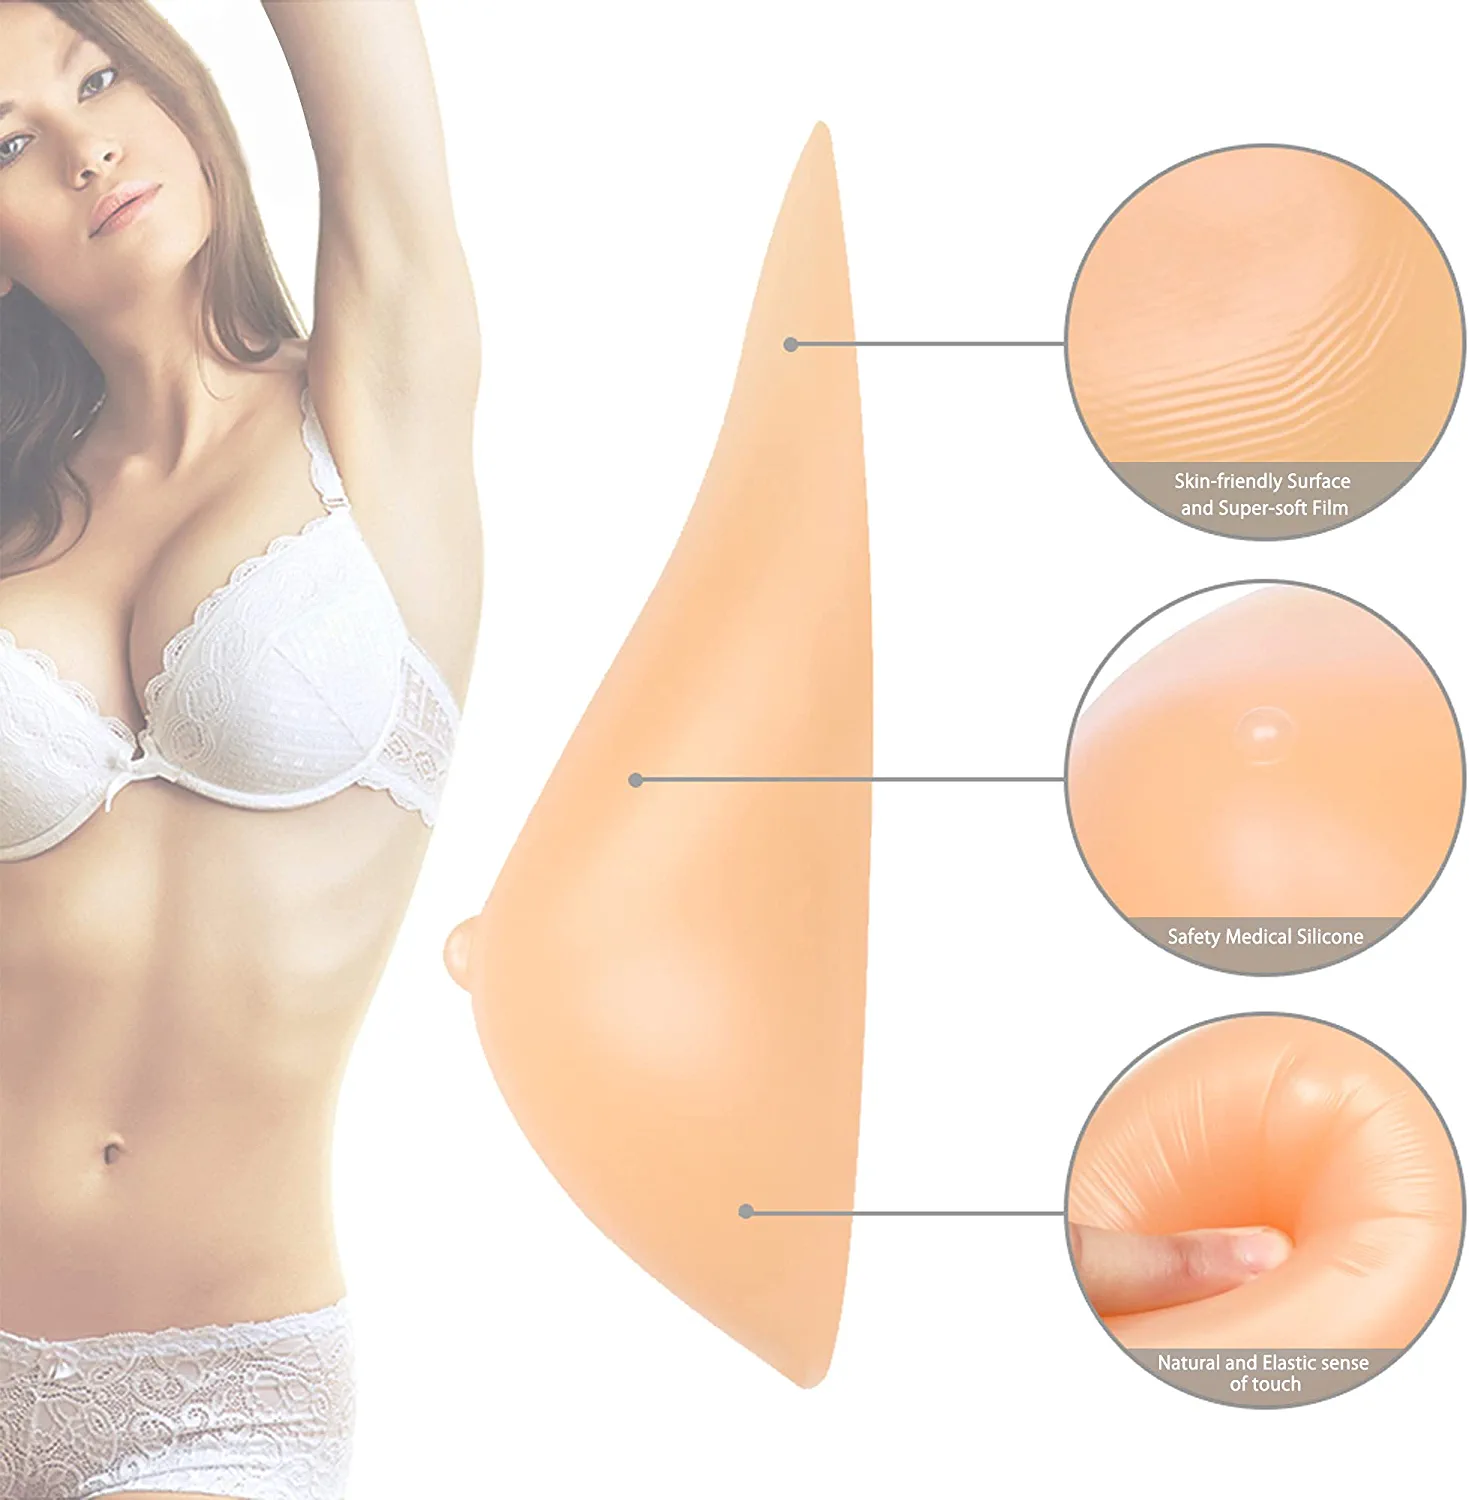 Breast Form Bra Insert - Non-Surgical Breast Prosthesis - eighty thirty